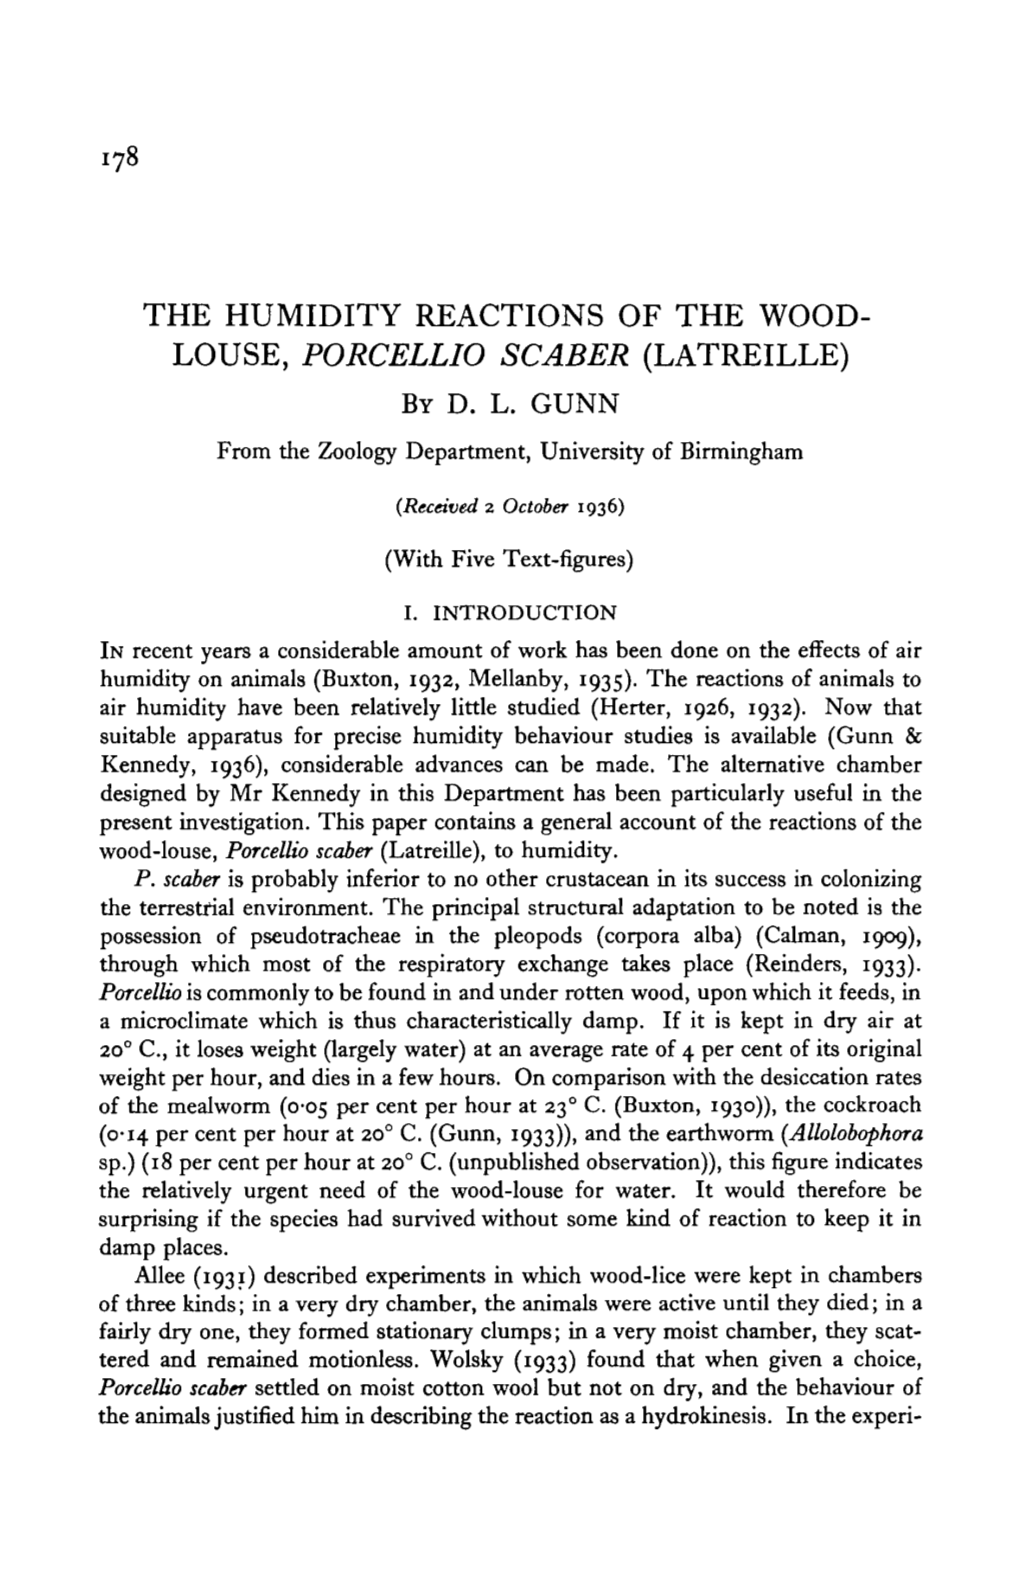 The Humidity Reactions of the Wood- Louse, Porcellio Scaber (Latreille) by D